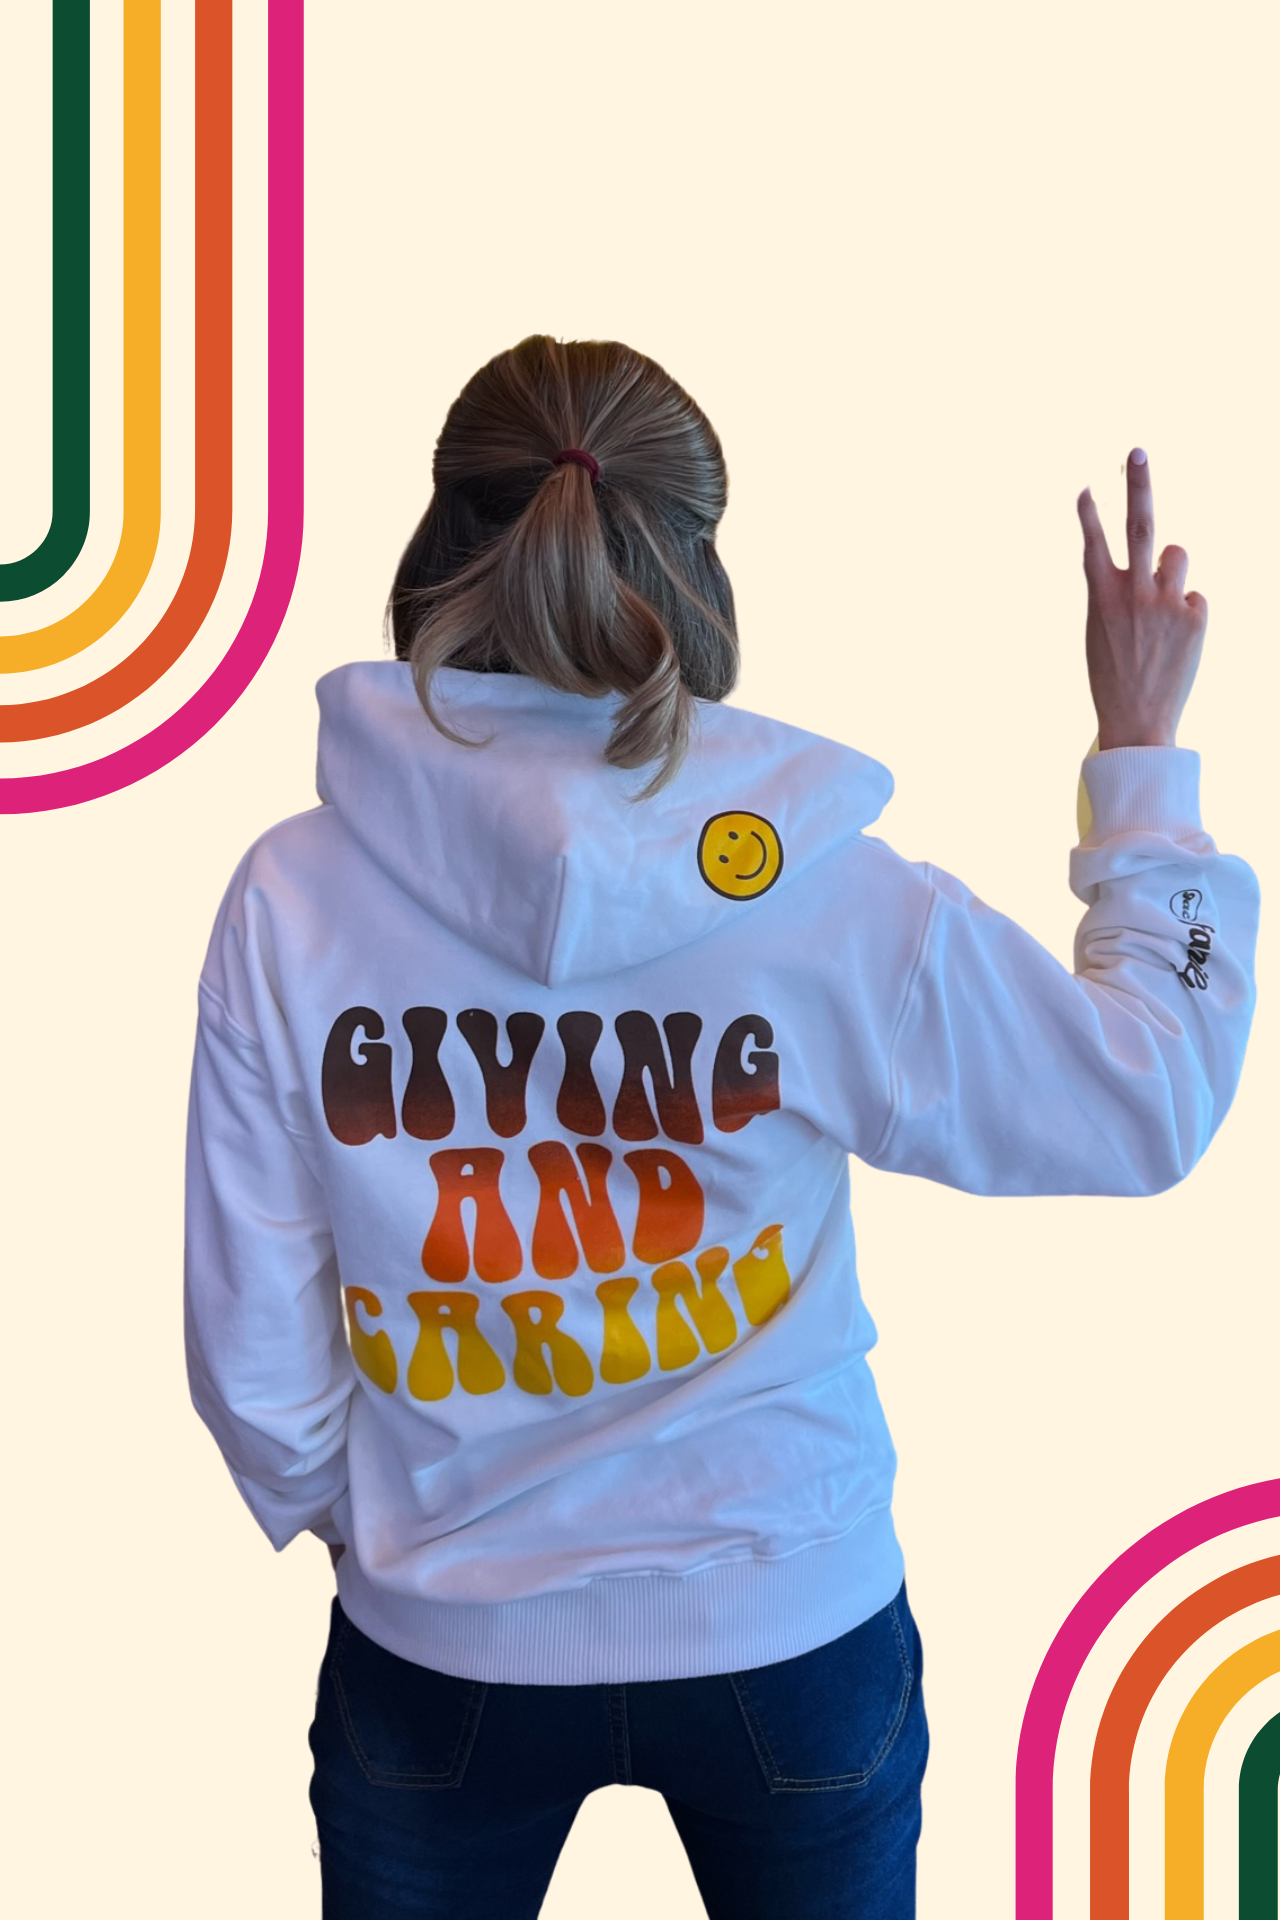 GIVING AND CARING GAC HOODIE